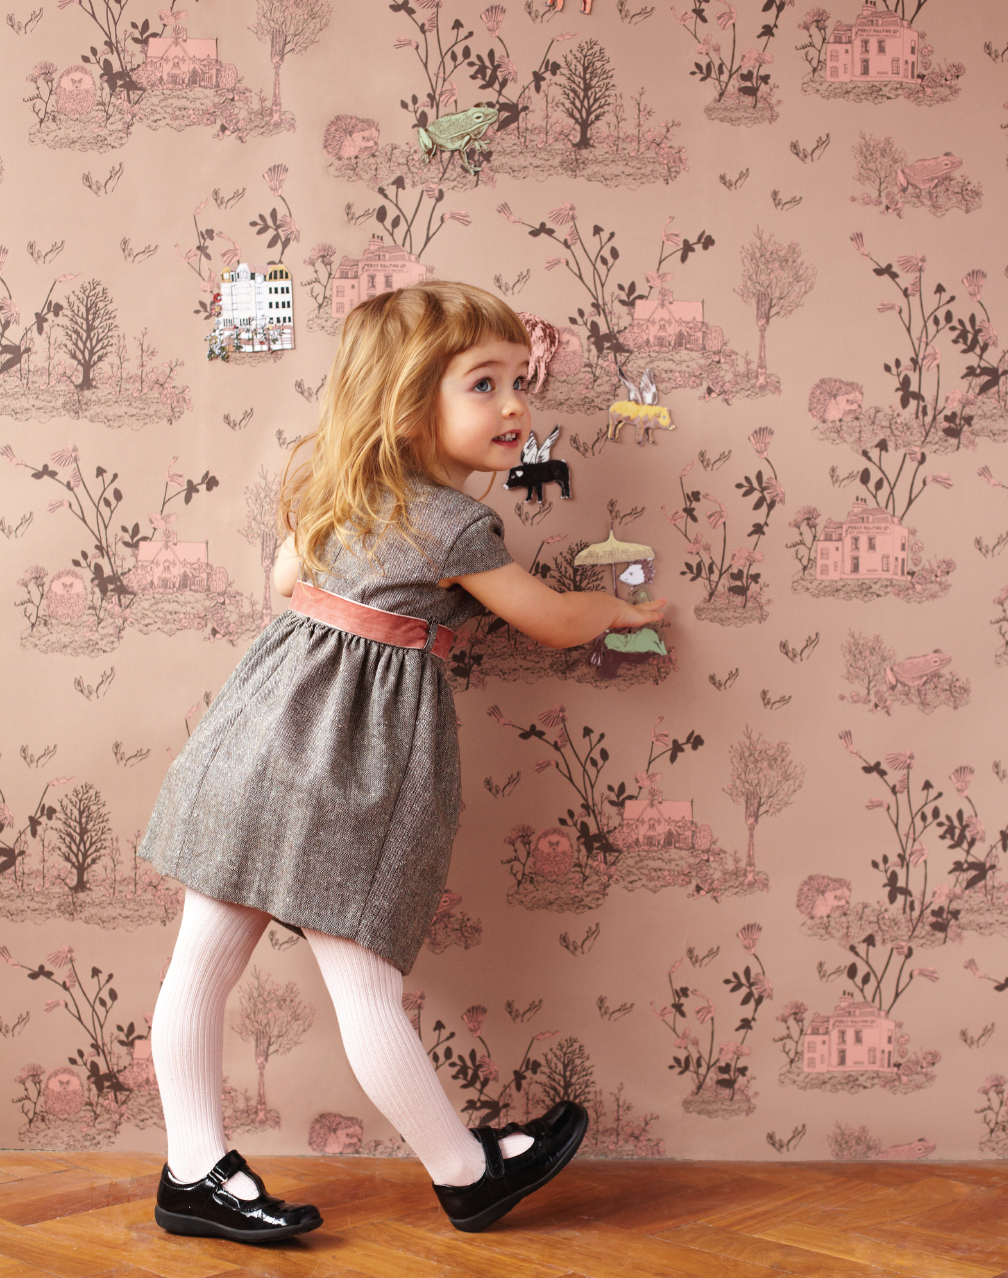 Woodlands Wallpaper in Brown and Pink